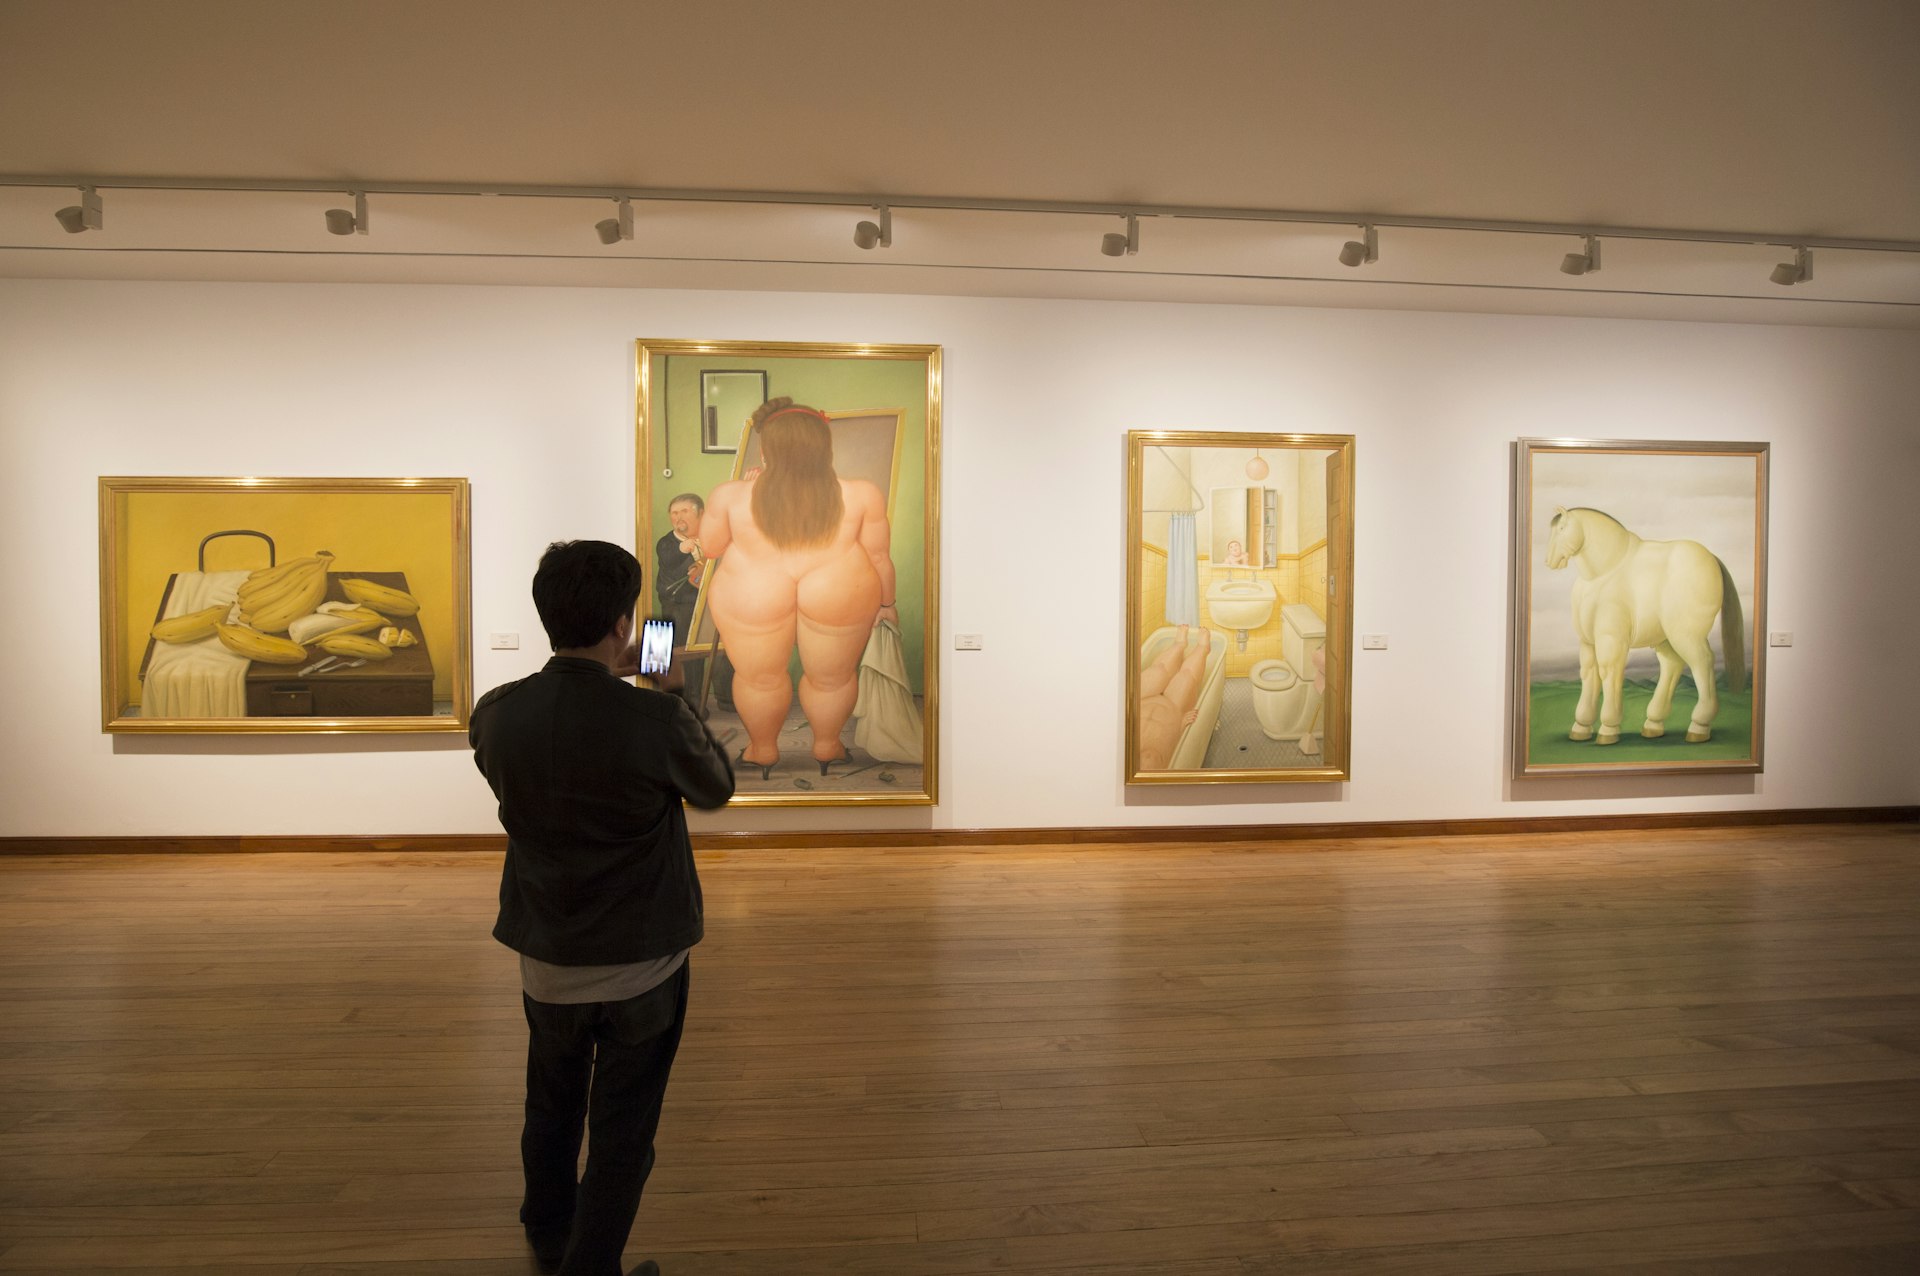 A man takes photos of works of art by Fernando Botero at the Museo Botero, Bogotá, Colombia, South American